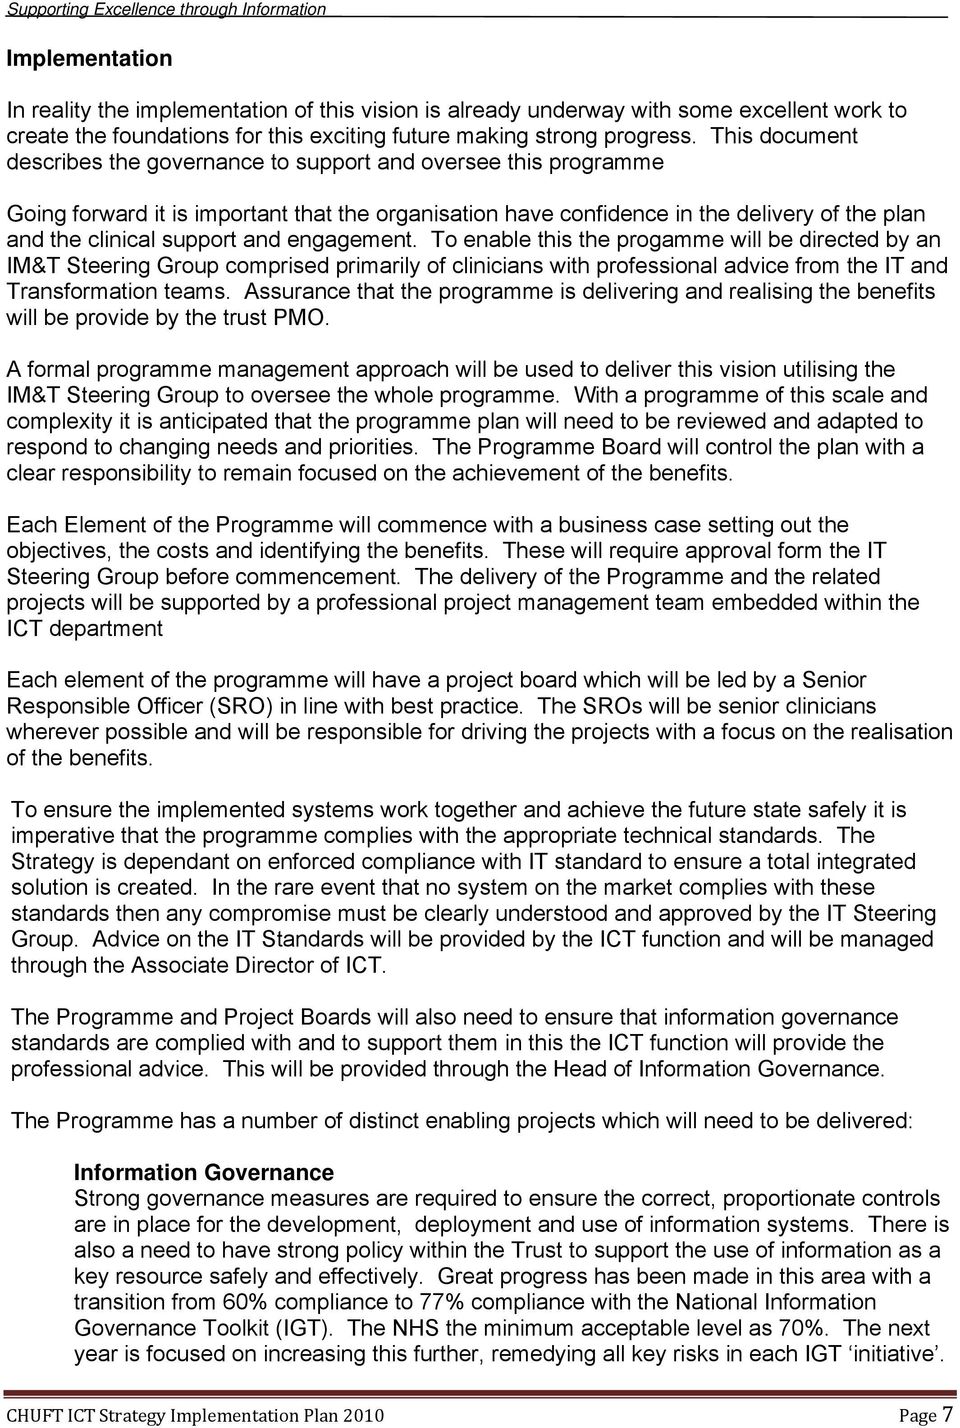 and engagement. To enable this the progamme will be directed by an IM&T Steering Group comprised primarily of clinicians with professional advice from the IT and Transformation teams.